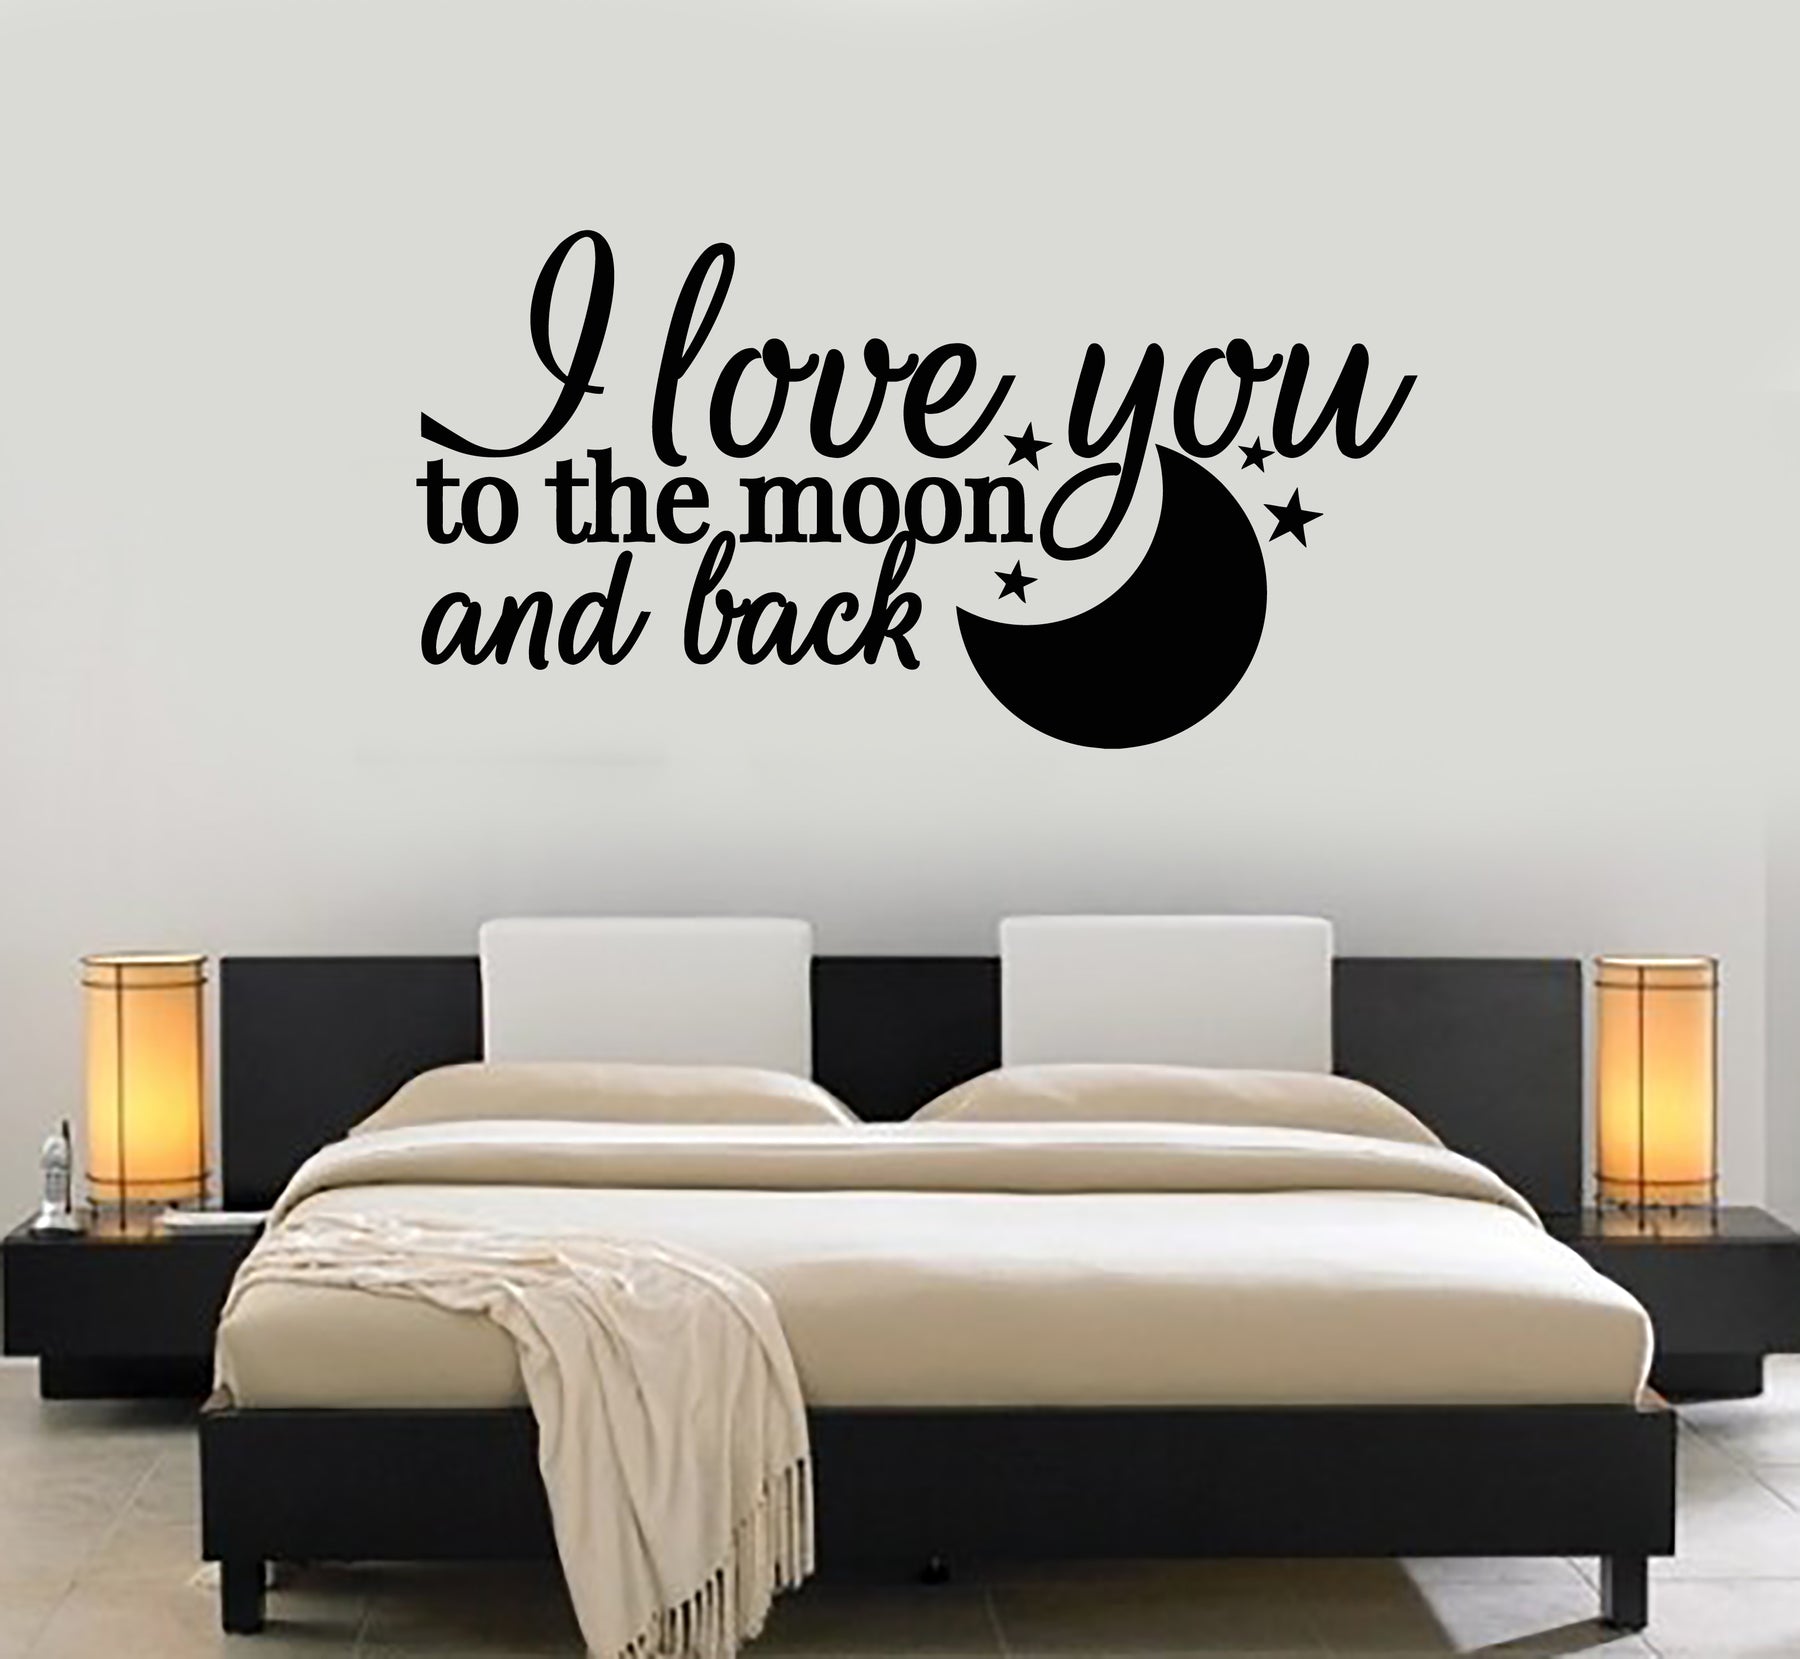 Vinyl Wall Decal Quote I Love You Moon Stars Romance Bedroom Decor Stickers Mural G1075